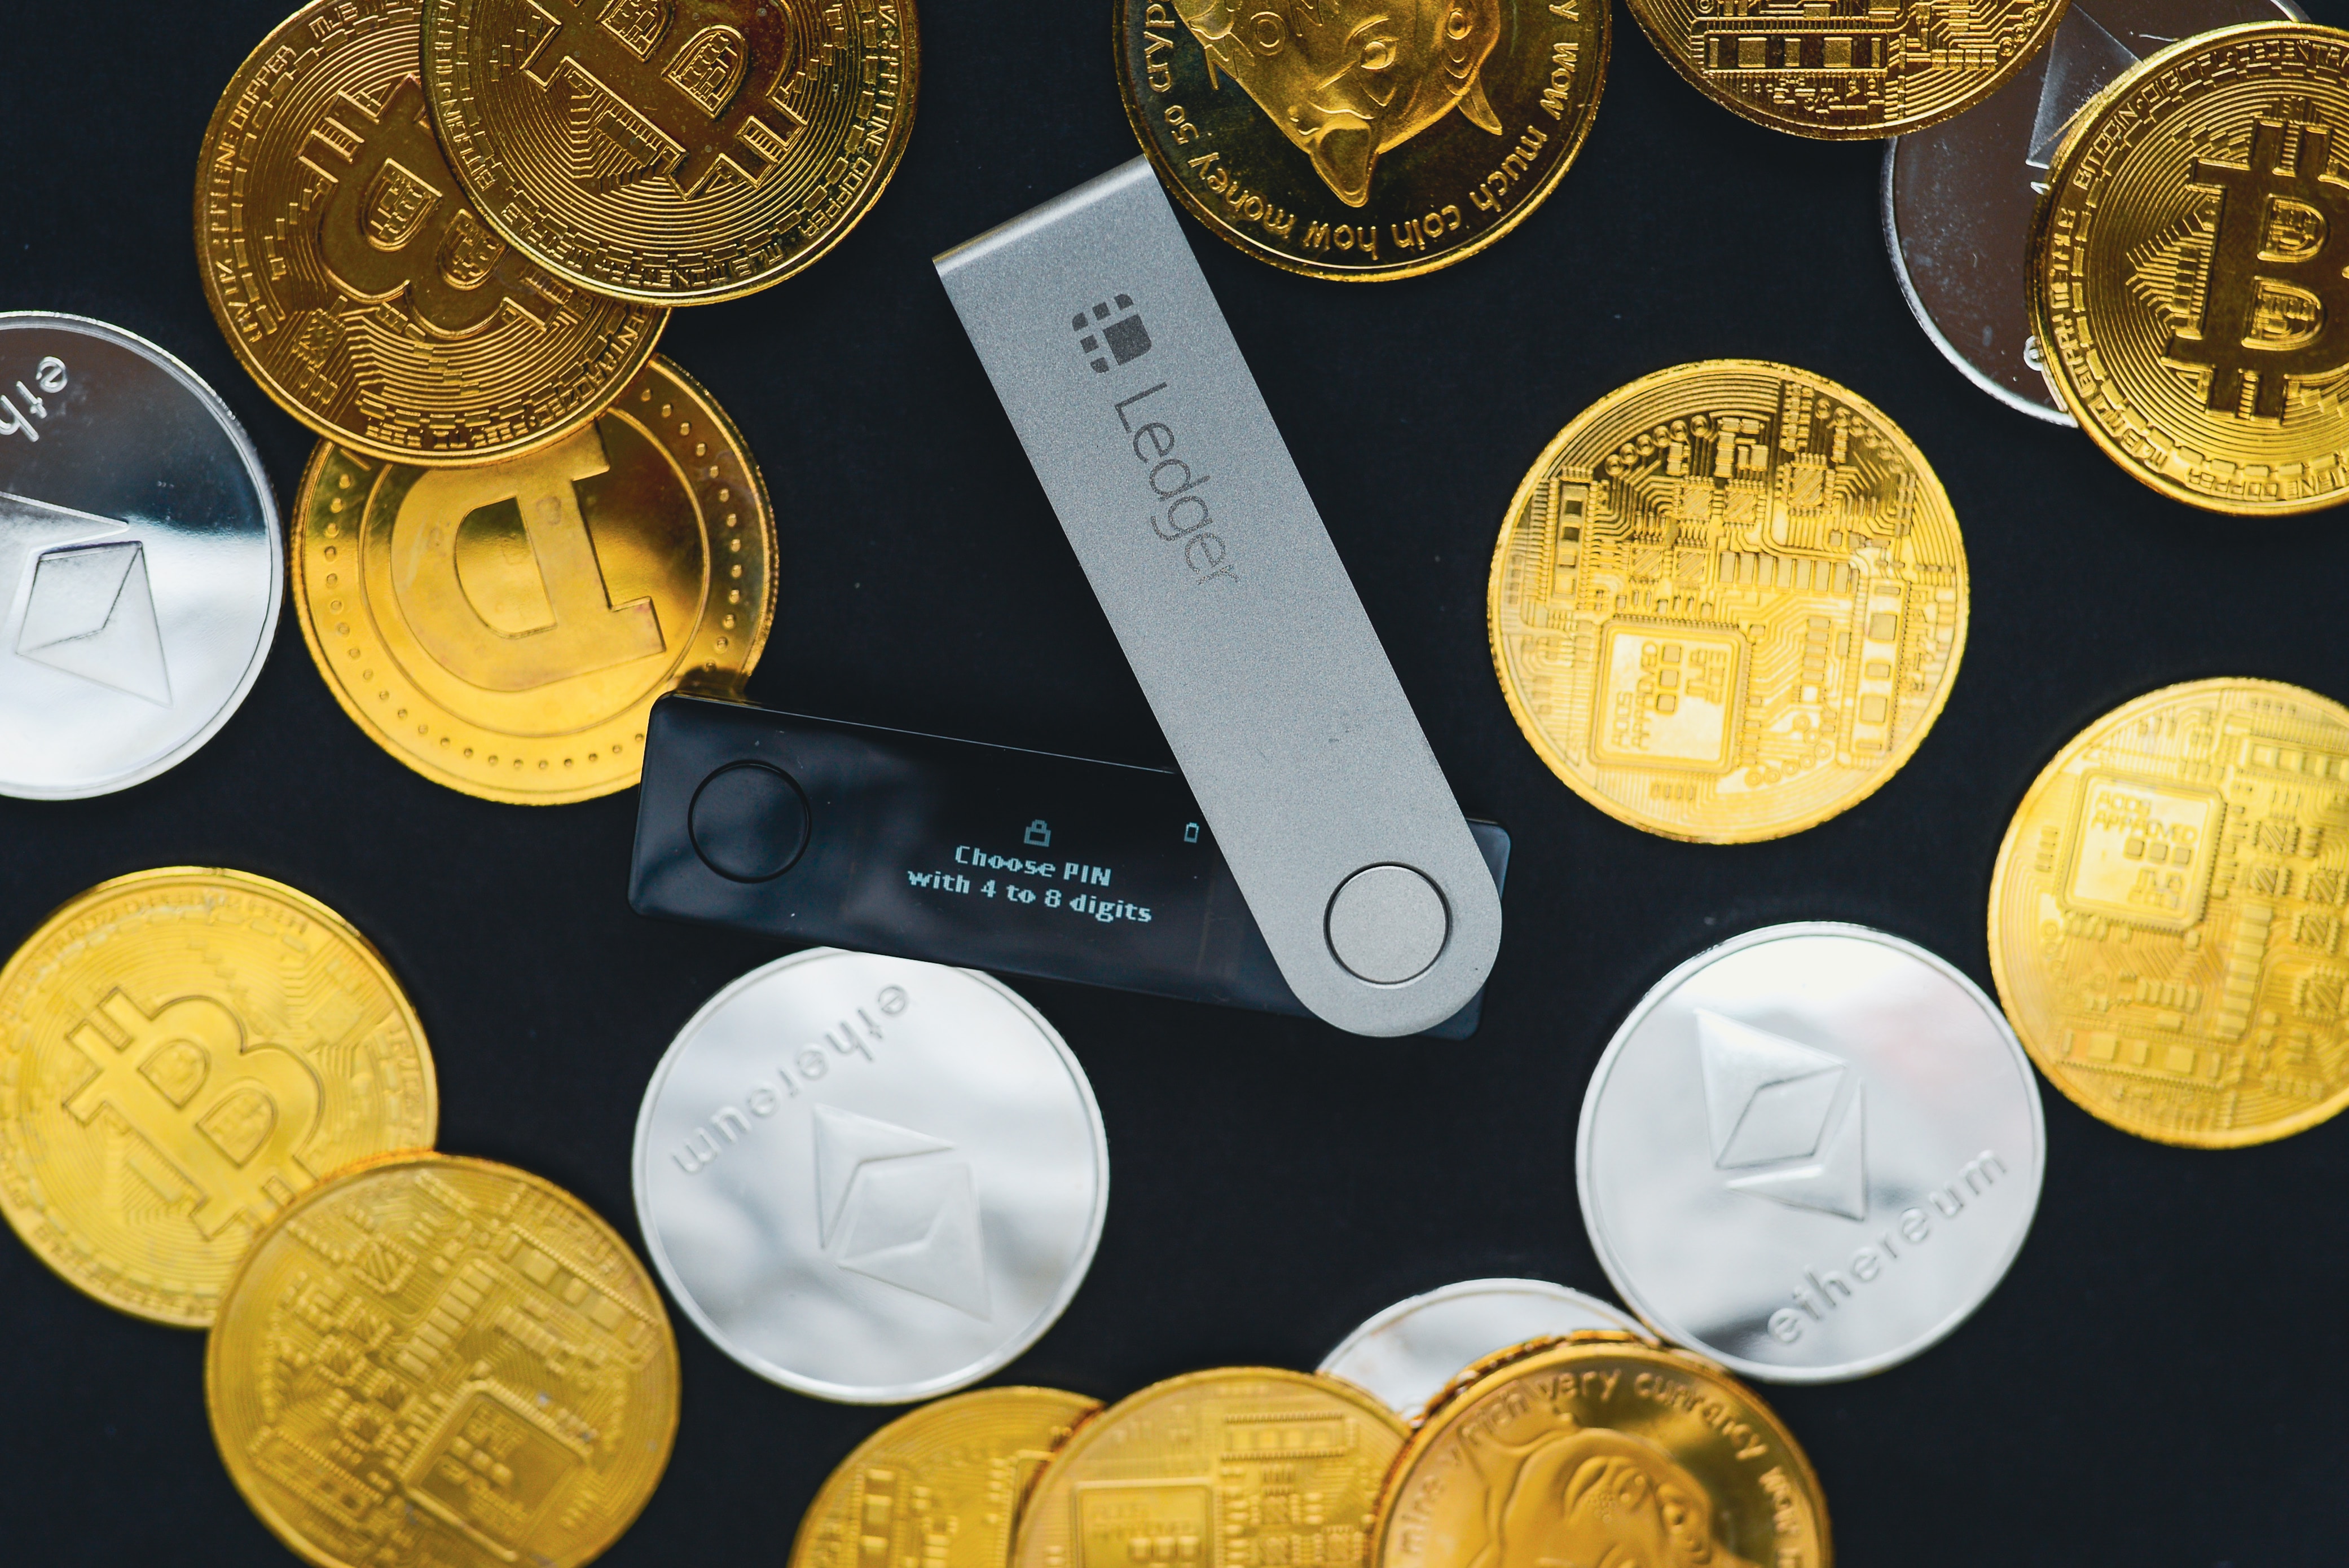 Crypto coins and a ledger wallet